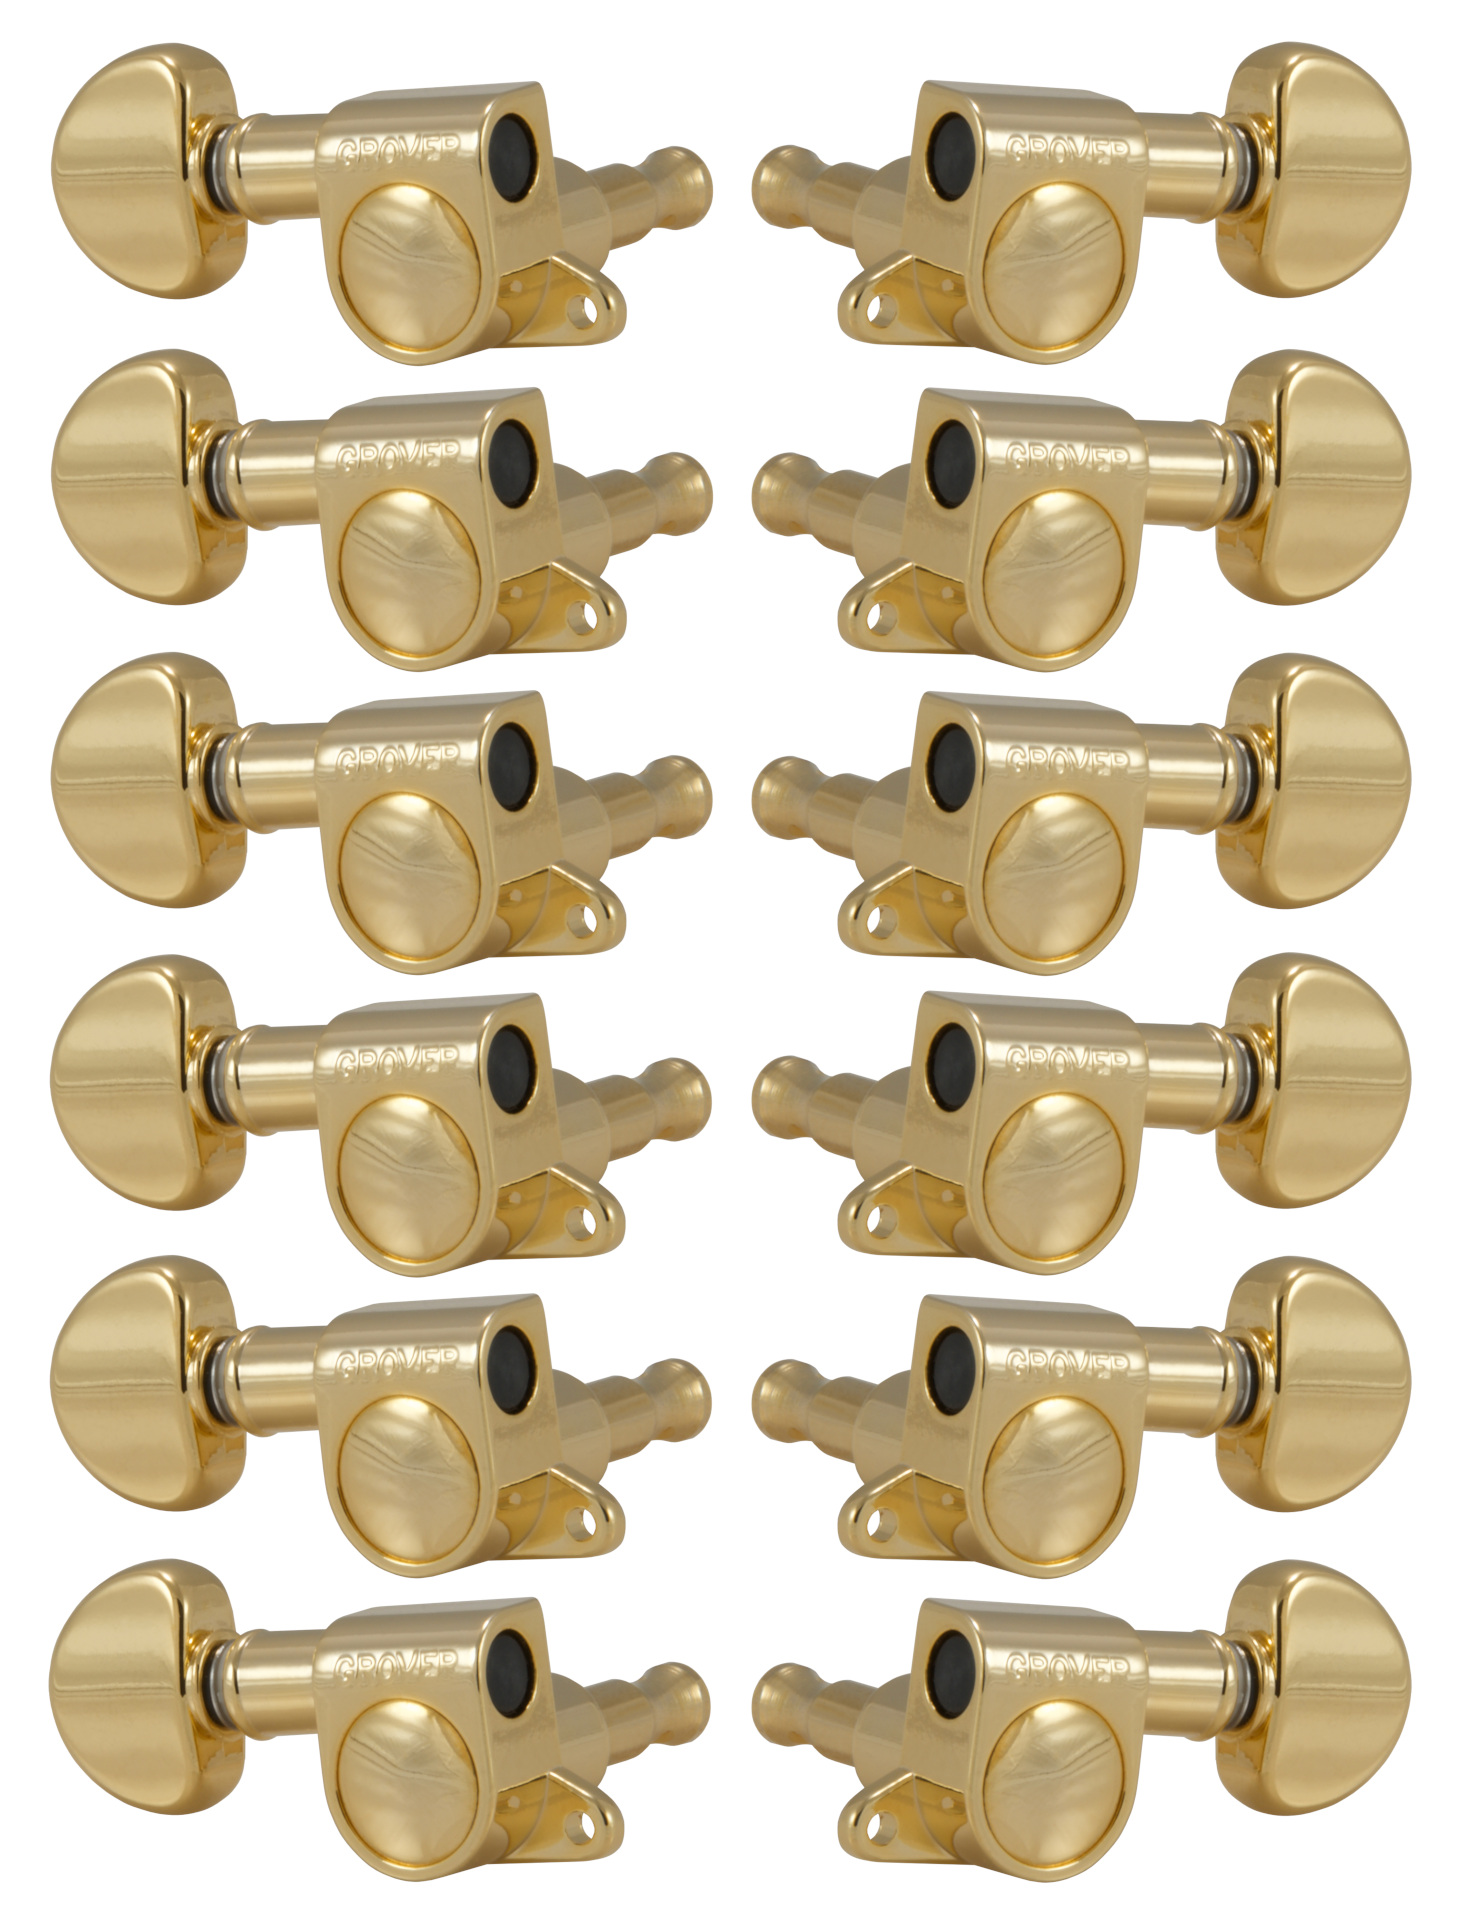 Grover 205G12 Mini Rotomatics with Round Button - 12-String Guitar Machine Heads, 6 + 6 - Gold